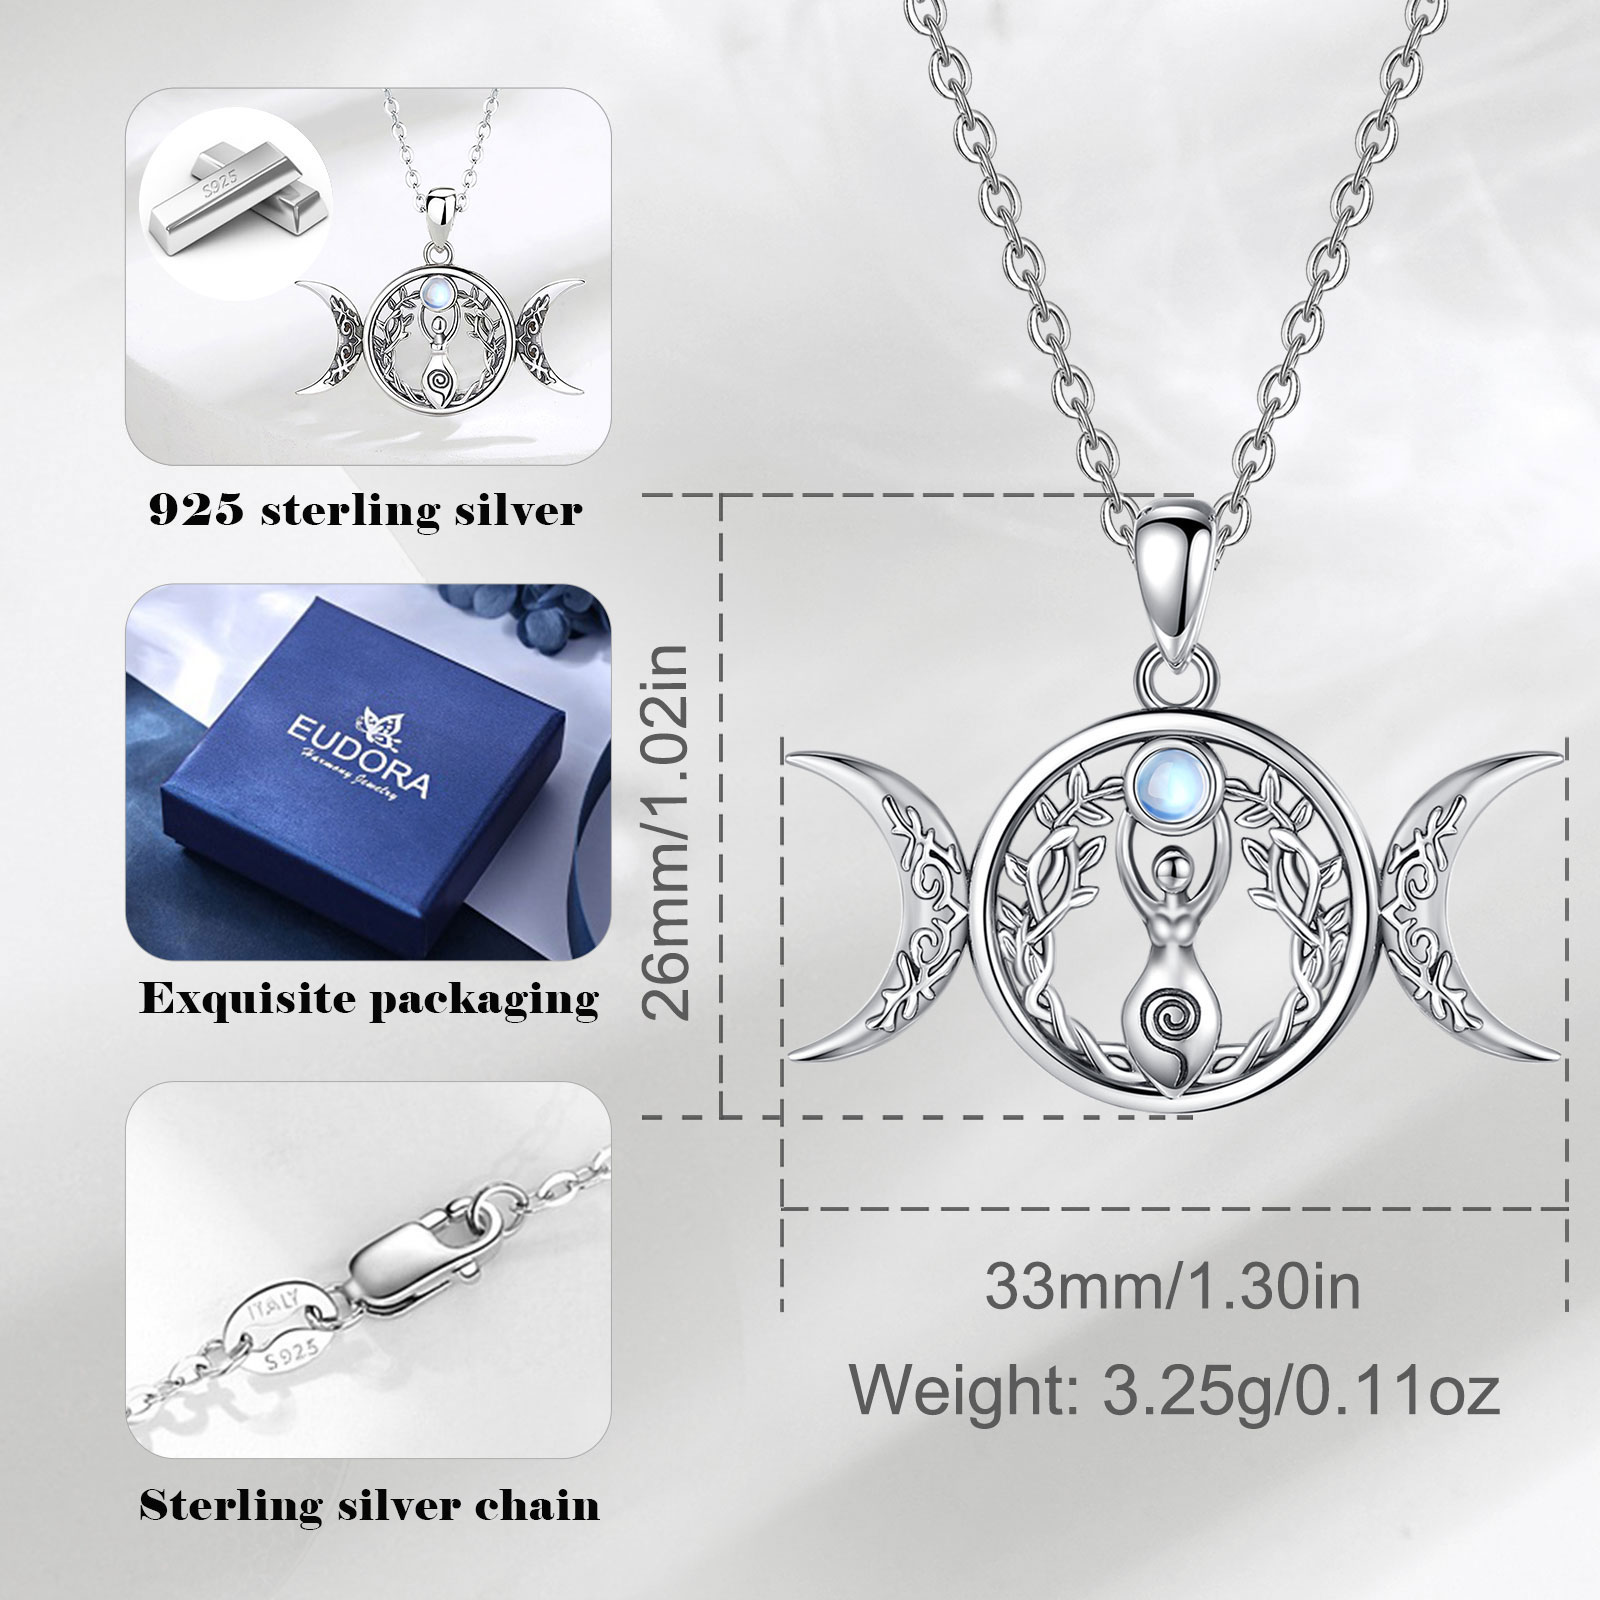 Eudora 925 Sterling Silver Triple Moon Goddess Necklace for Women Man Moonstone Tree of Life Amulet Pendant Witch Jewelry Gift 2